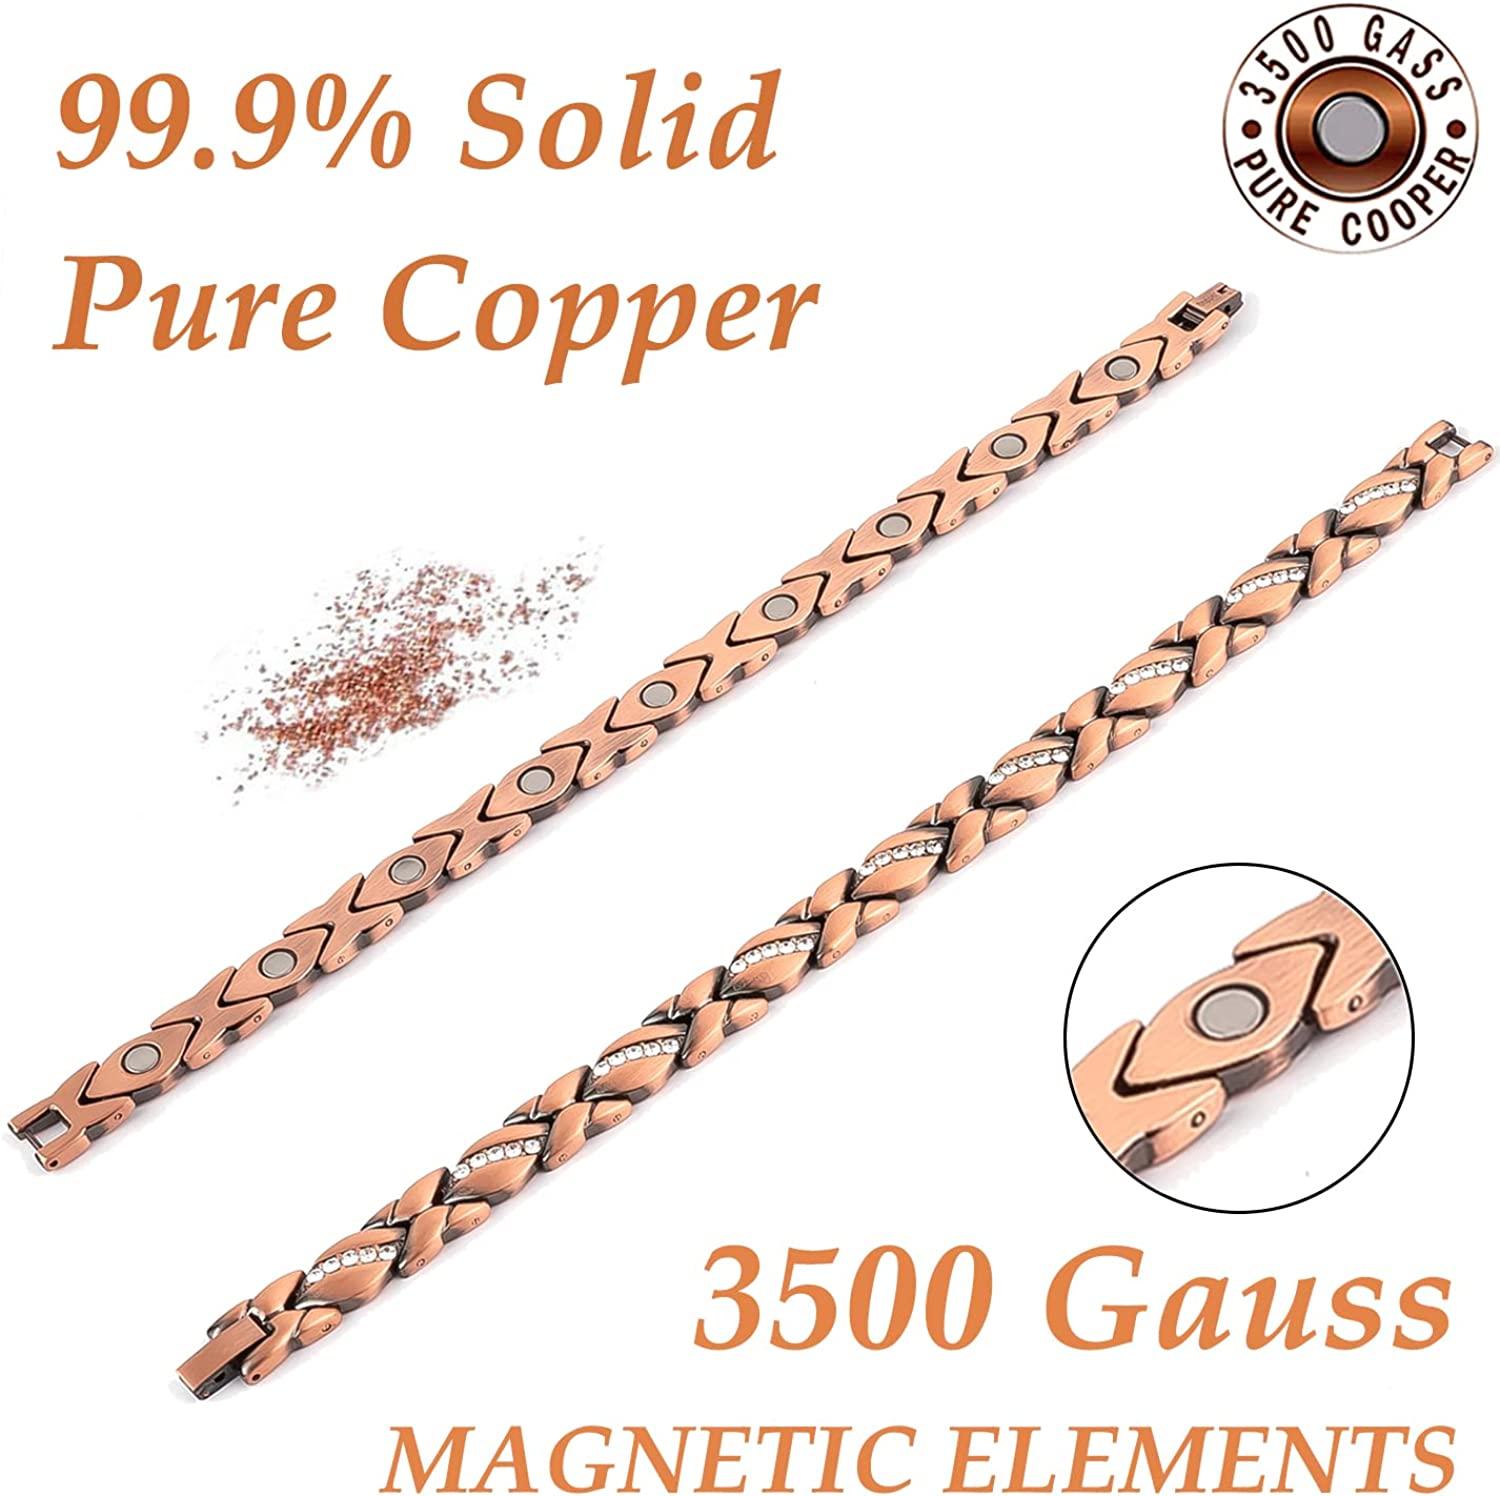 Have a question about Good Directions 100% Pure Copper Chain Link